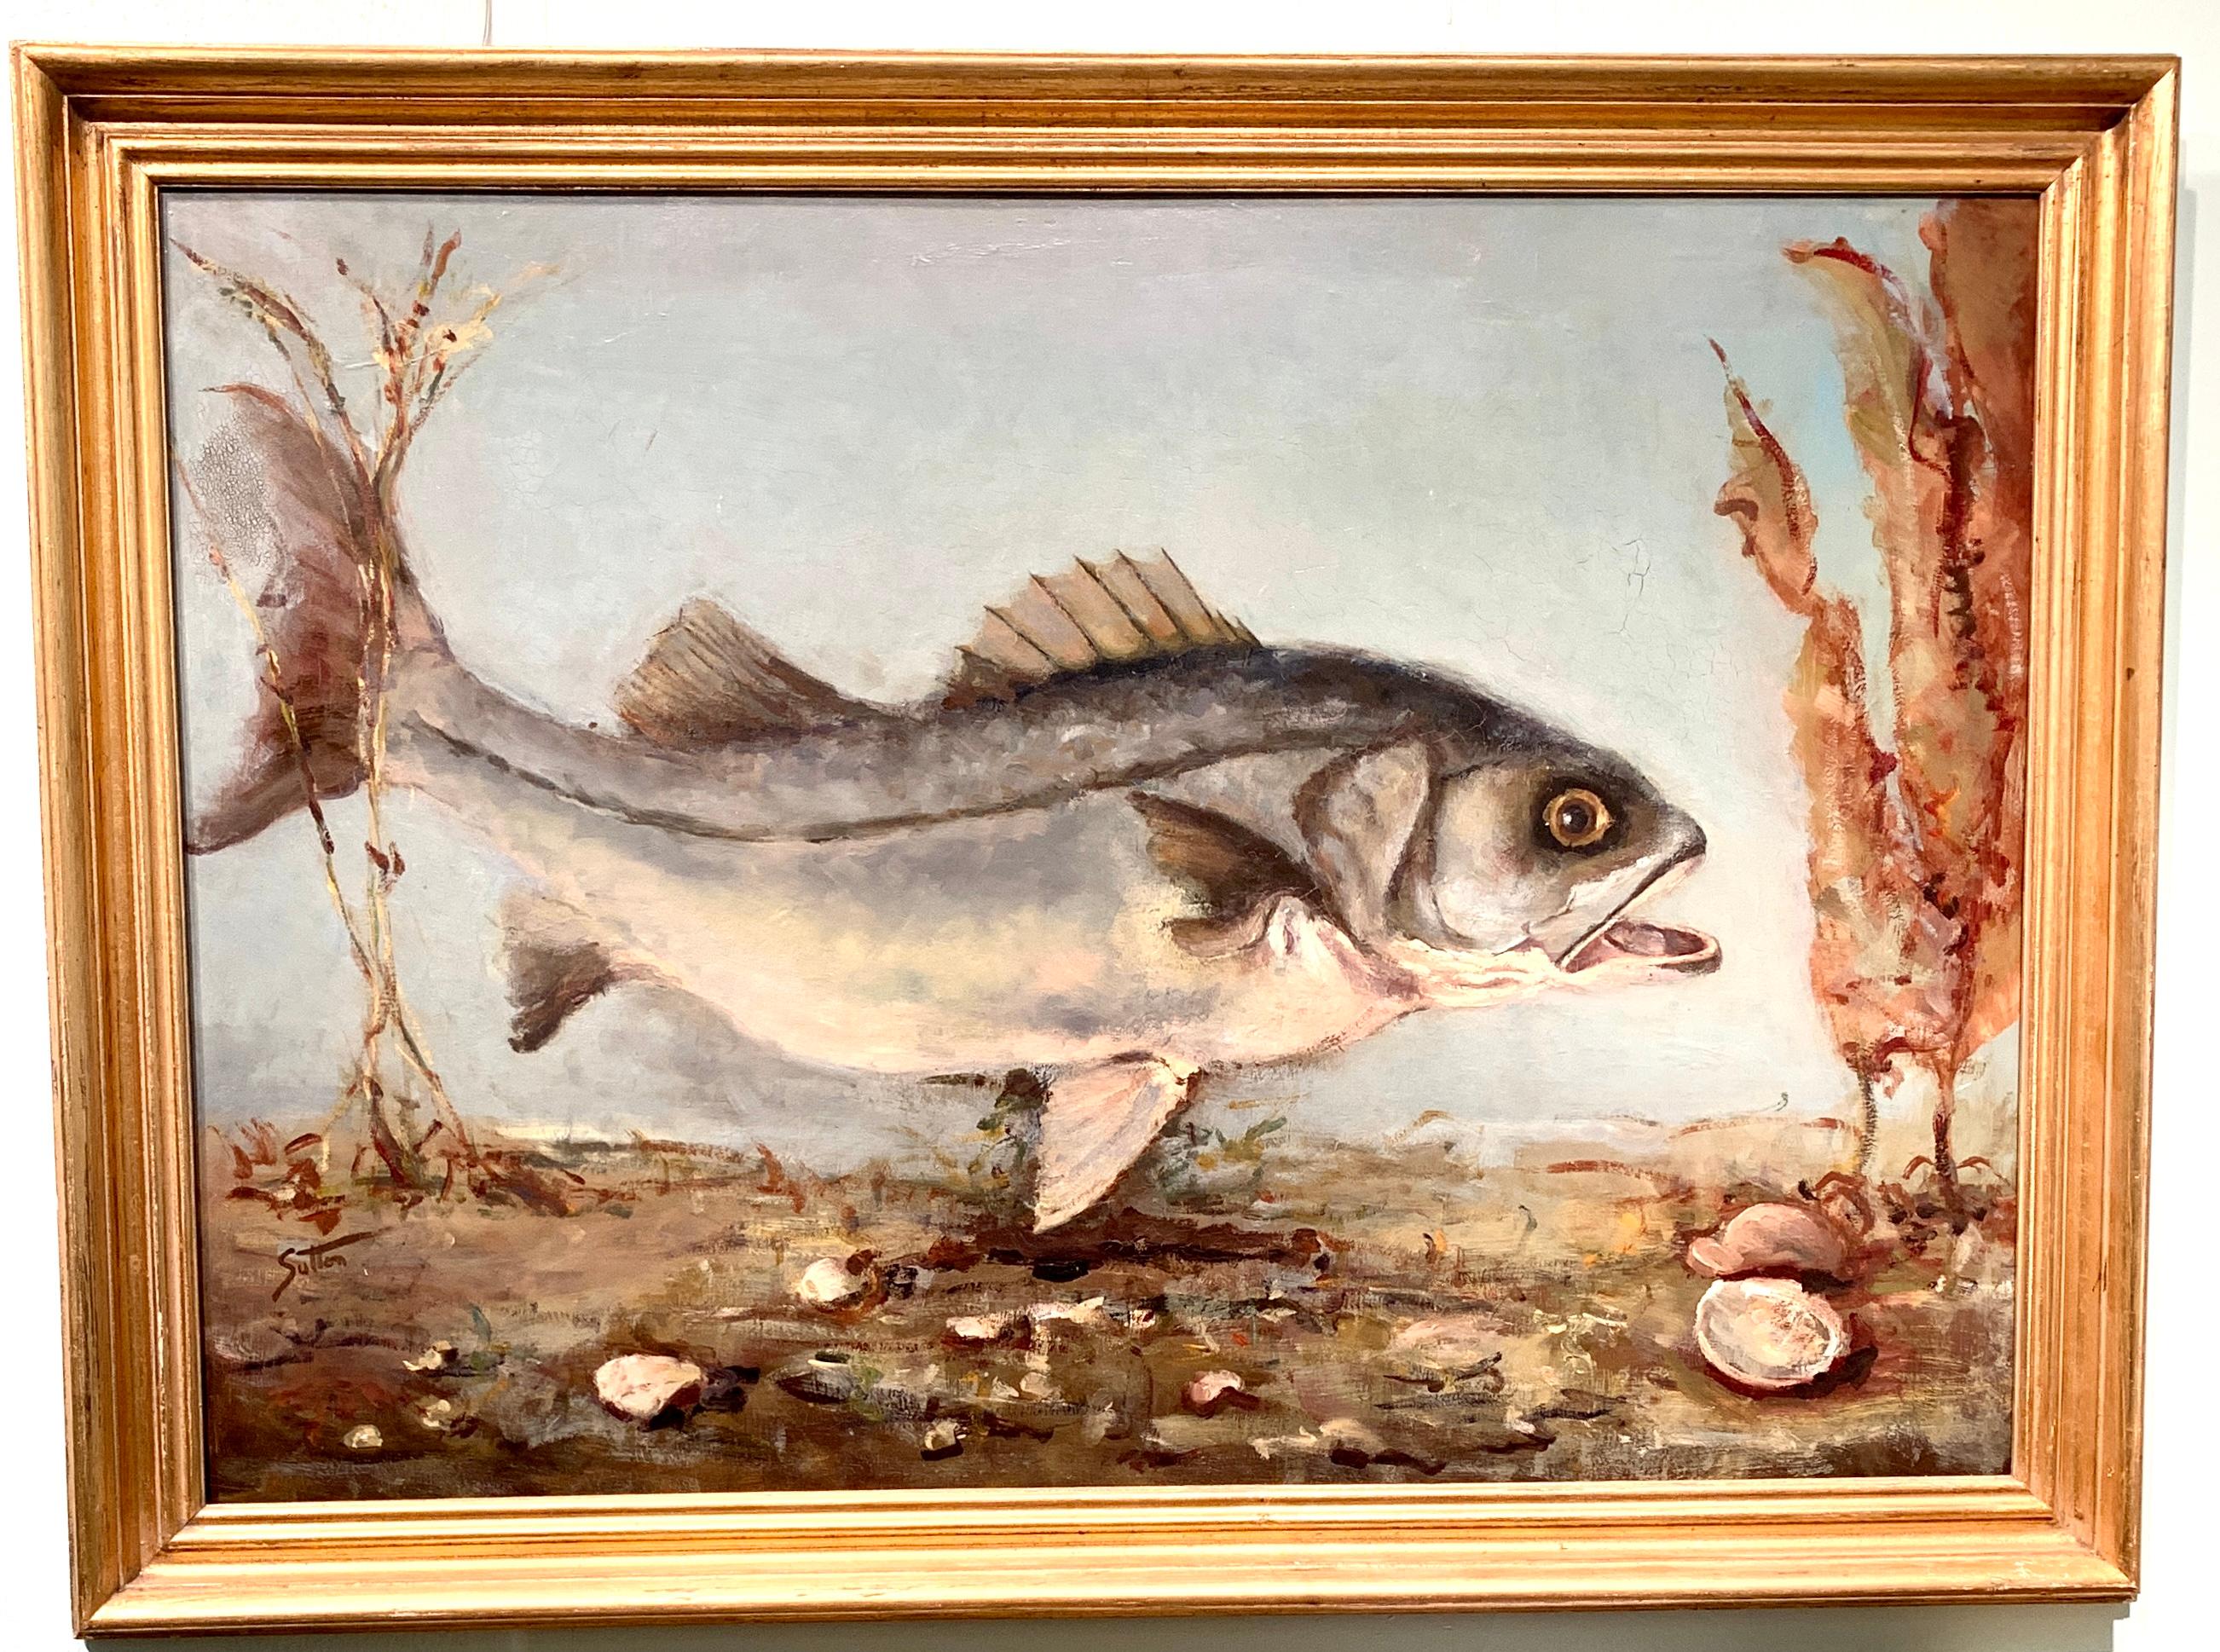 Harry Sutton Animal Painting - American Impressionist Portrait of a Fish swimming, possibly a carp or Bass